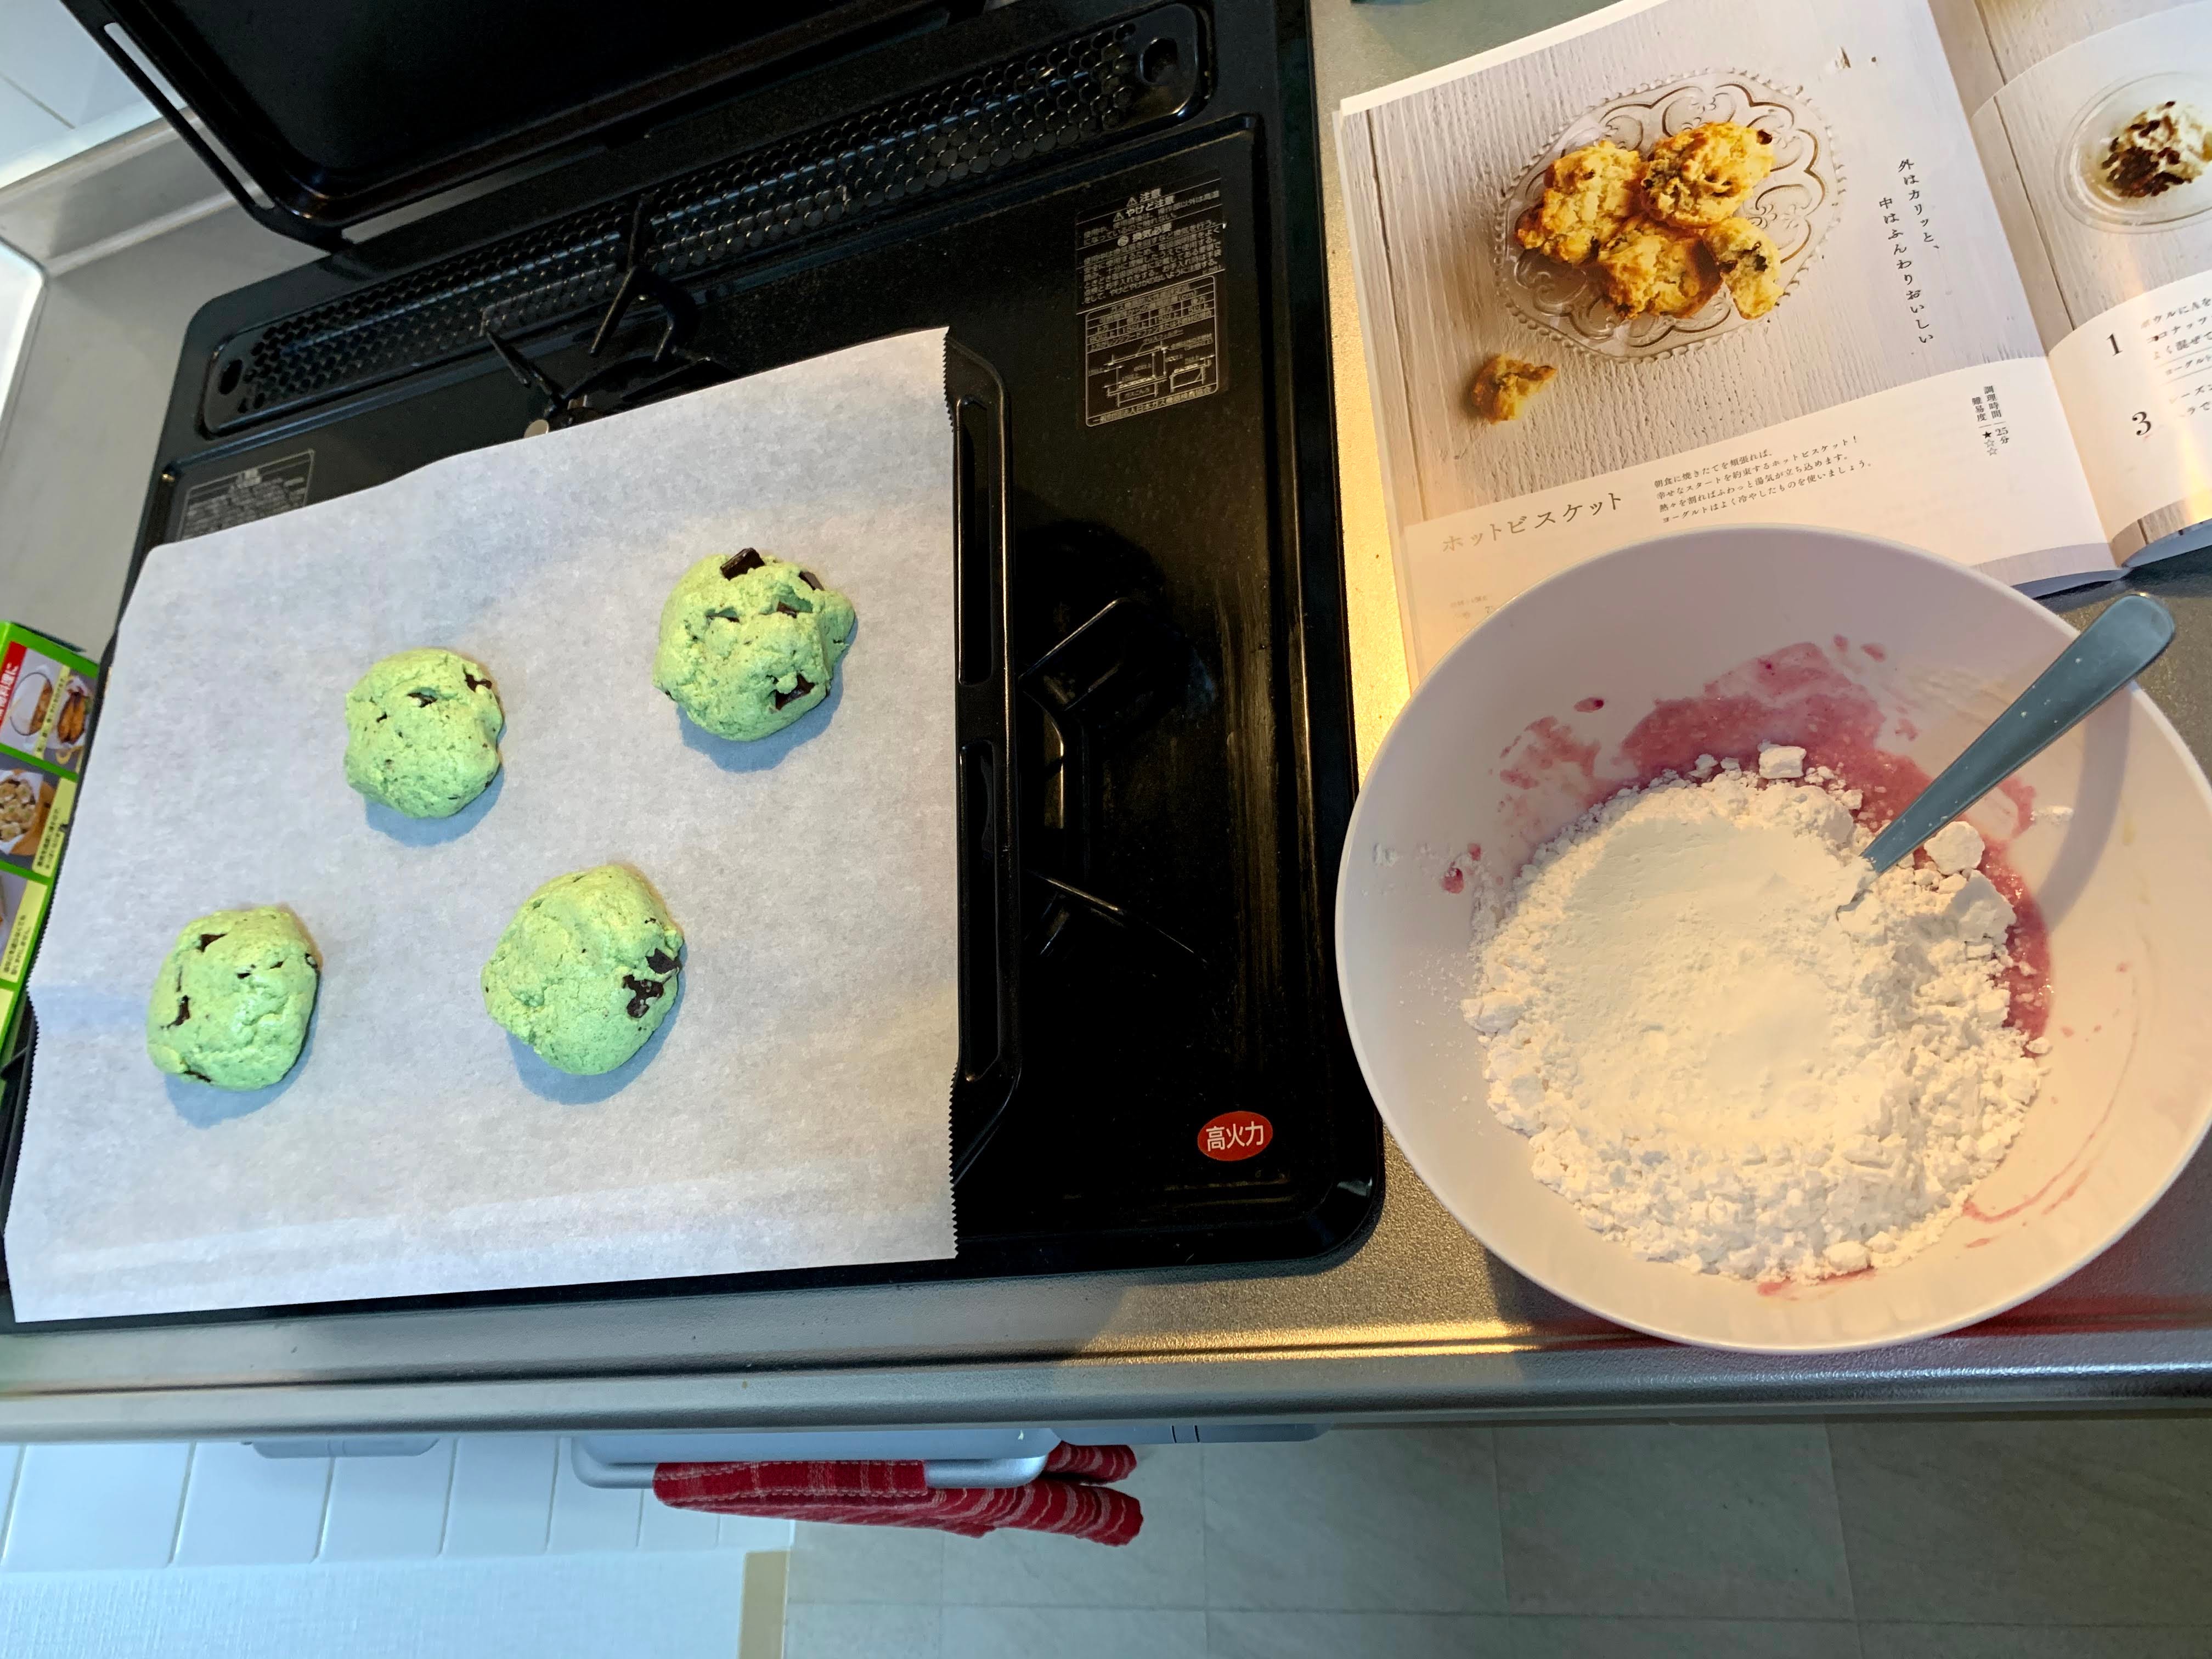 baking sheet with green biscuits